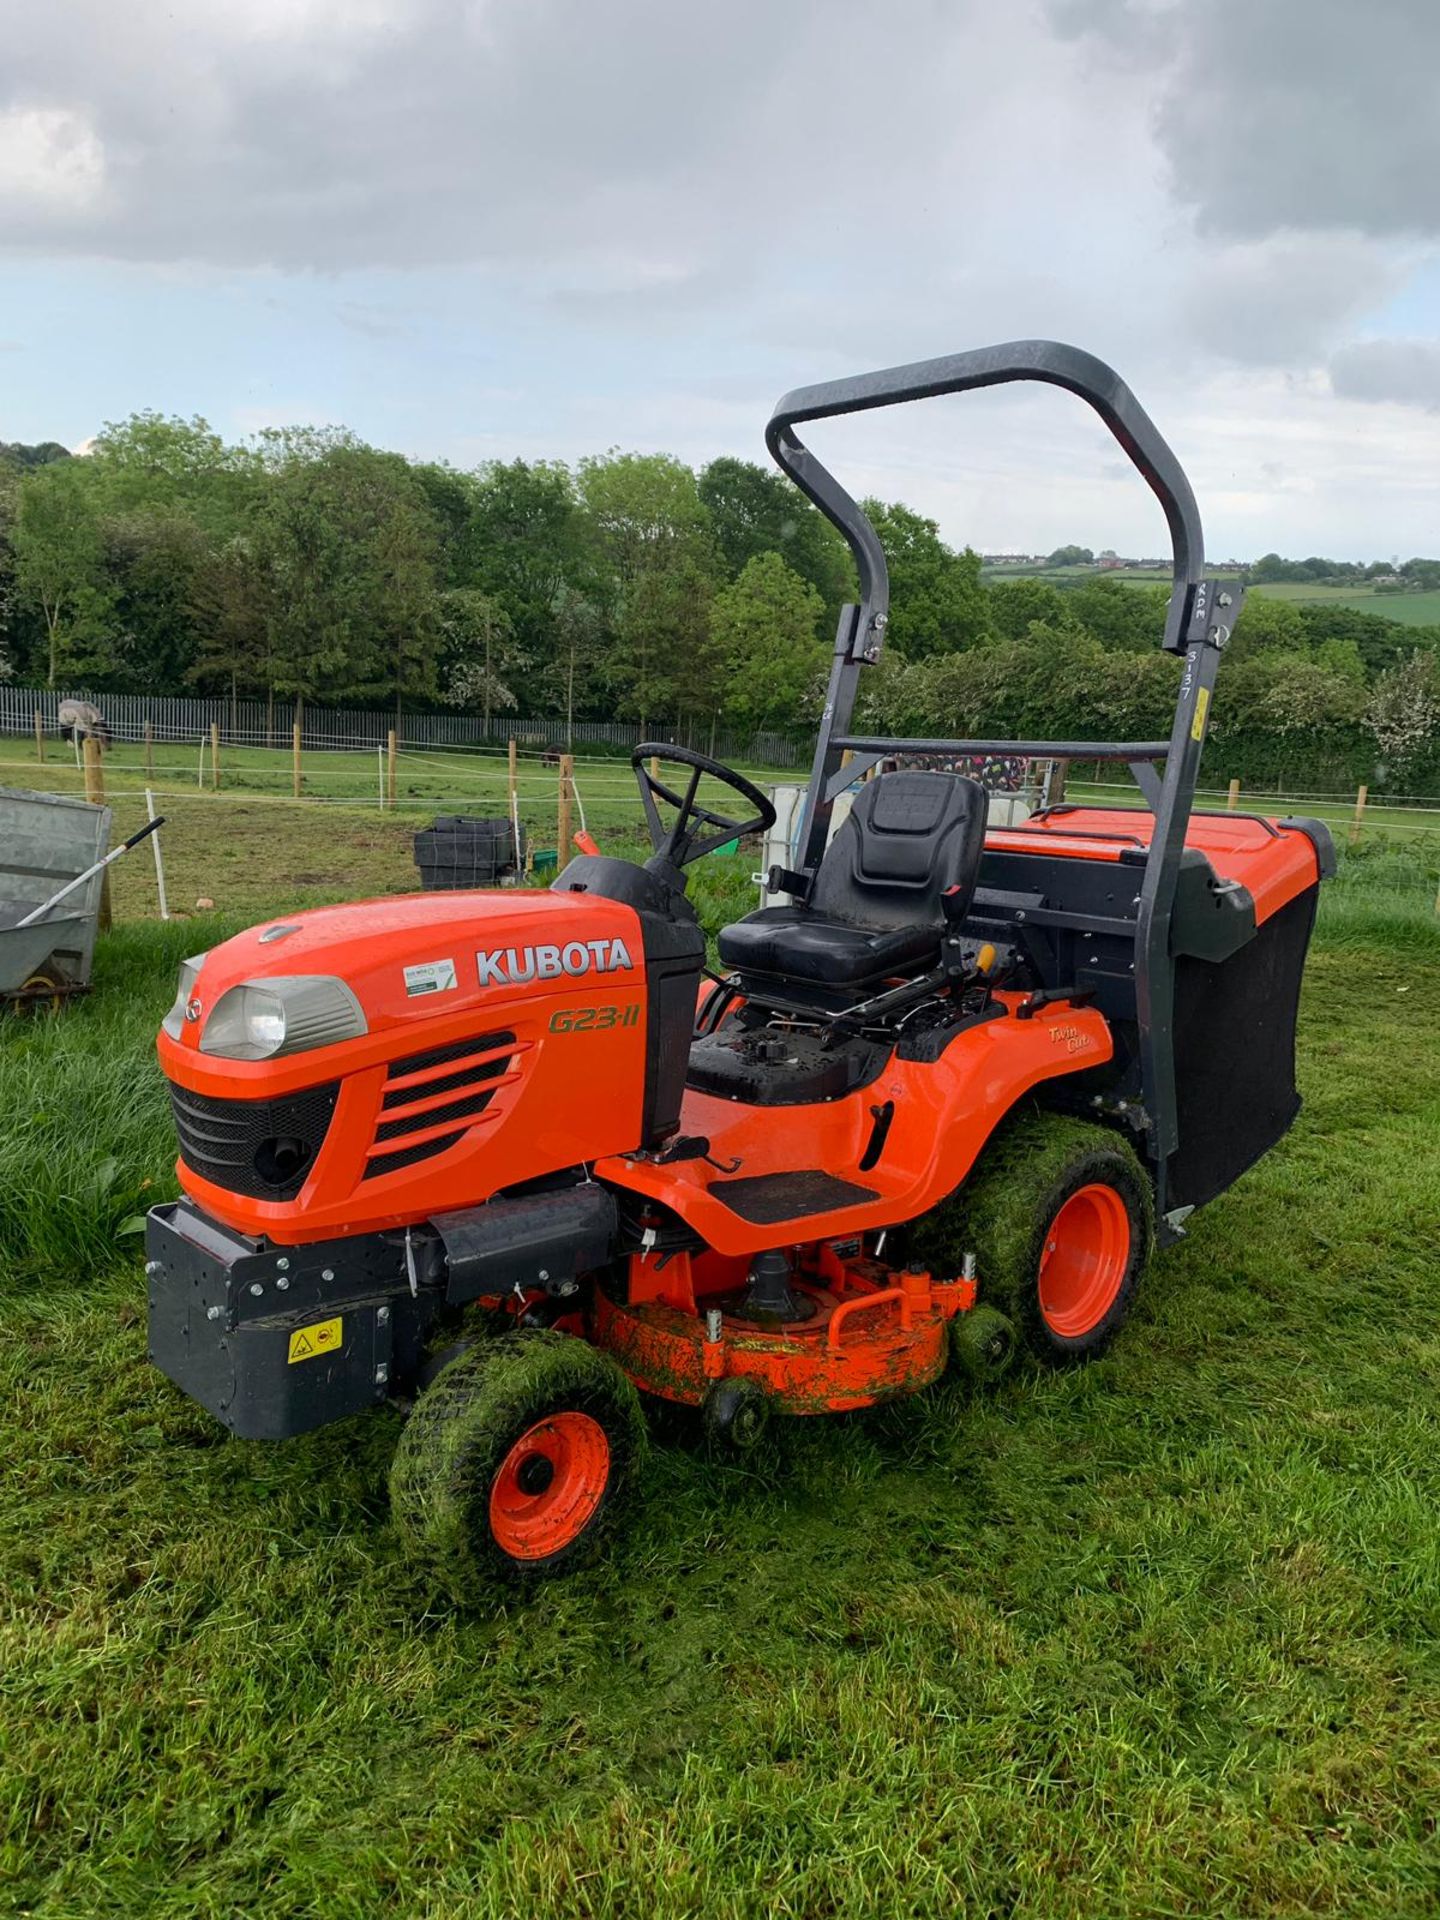 2015 KUBOTA G23-II TWIN CUT LAWN MOWER WITH ROLL BAR, HYDRAULIC TIP, LOW DUMP COLLECTOR - 28 HOURS!! - Image 2 of 15